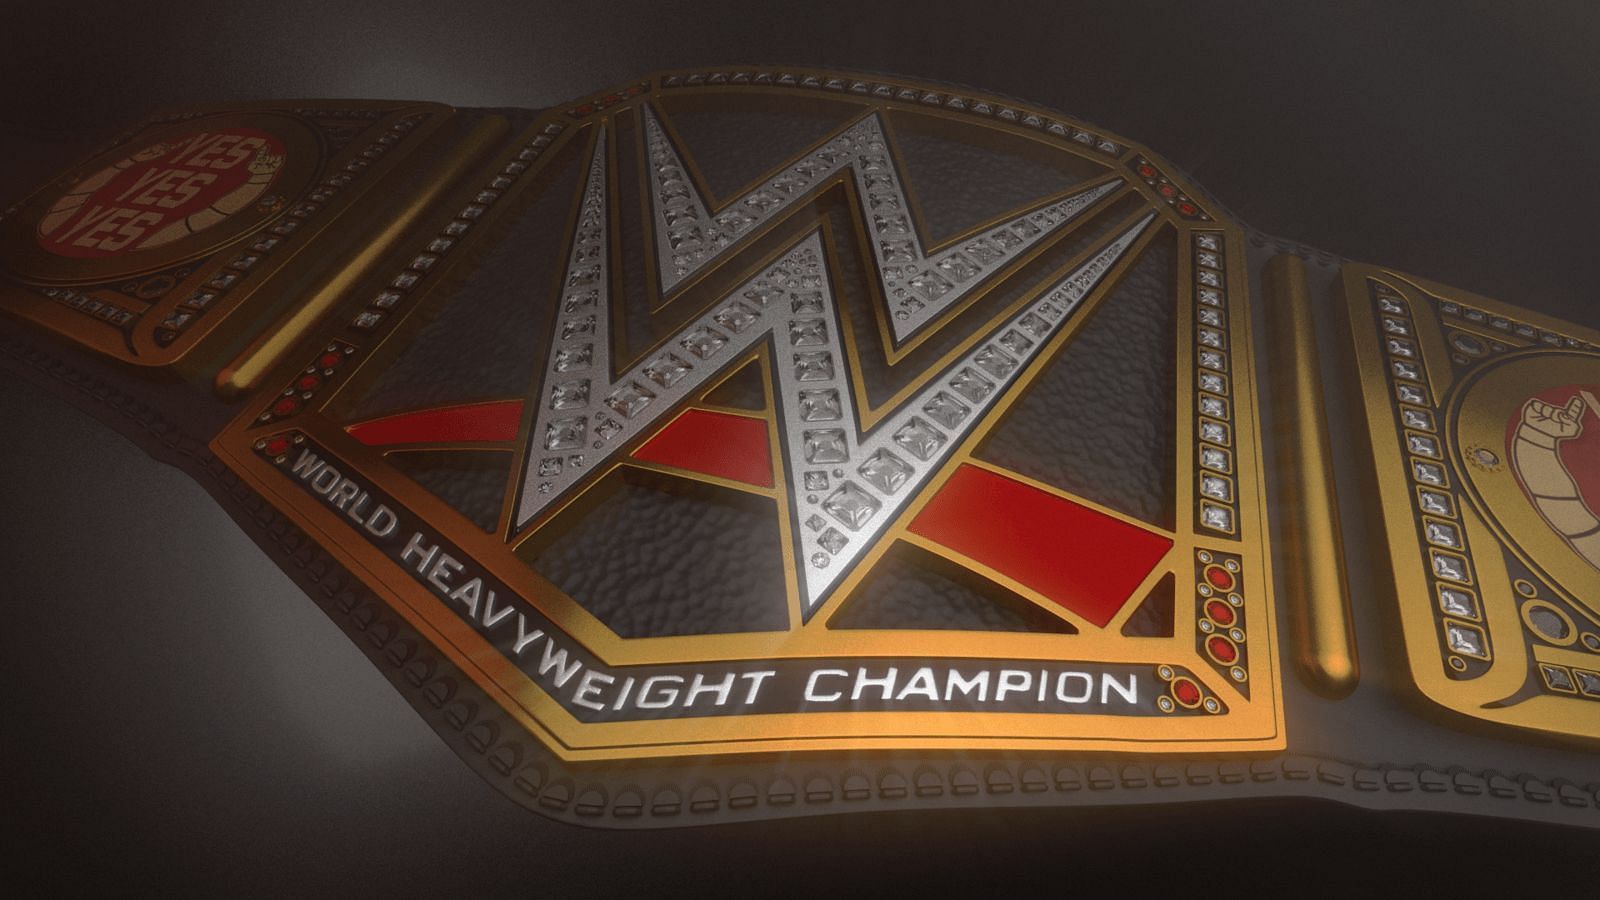 WWE Championship was unified with Universal title last year